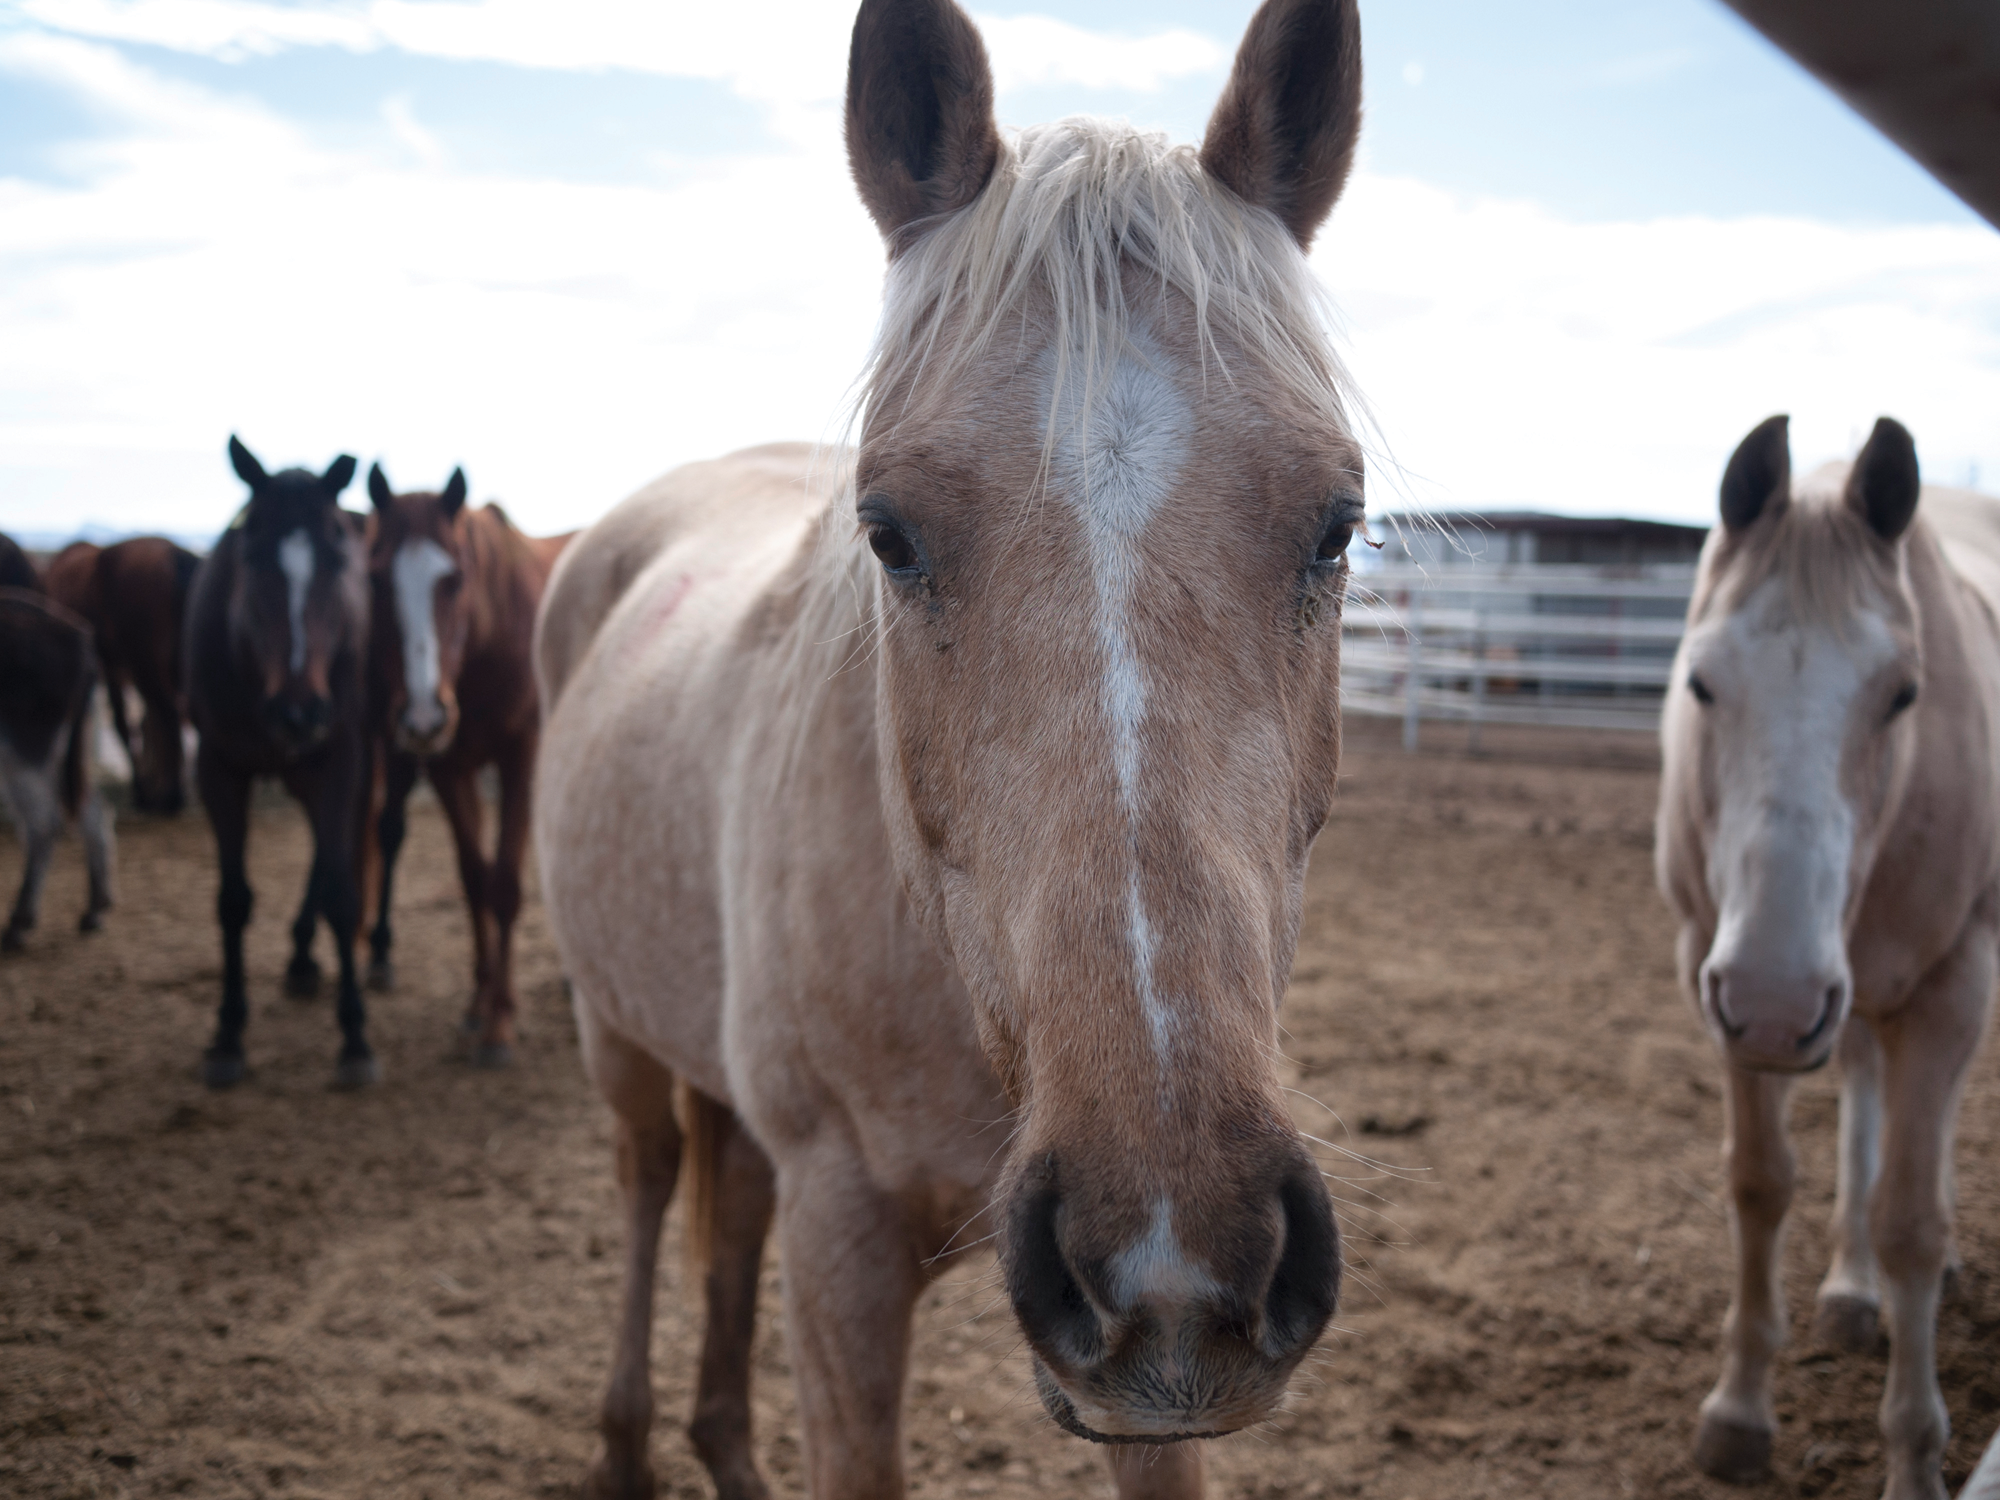 The Horse Export Business Booms in the Texas Borderlands